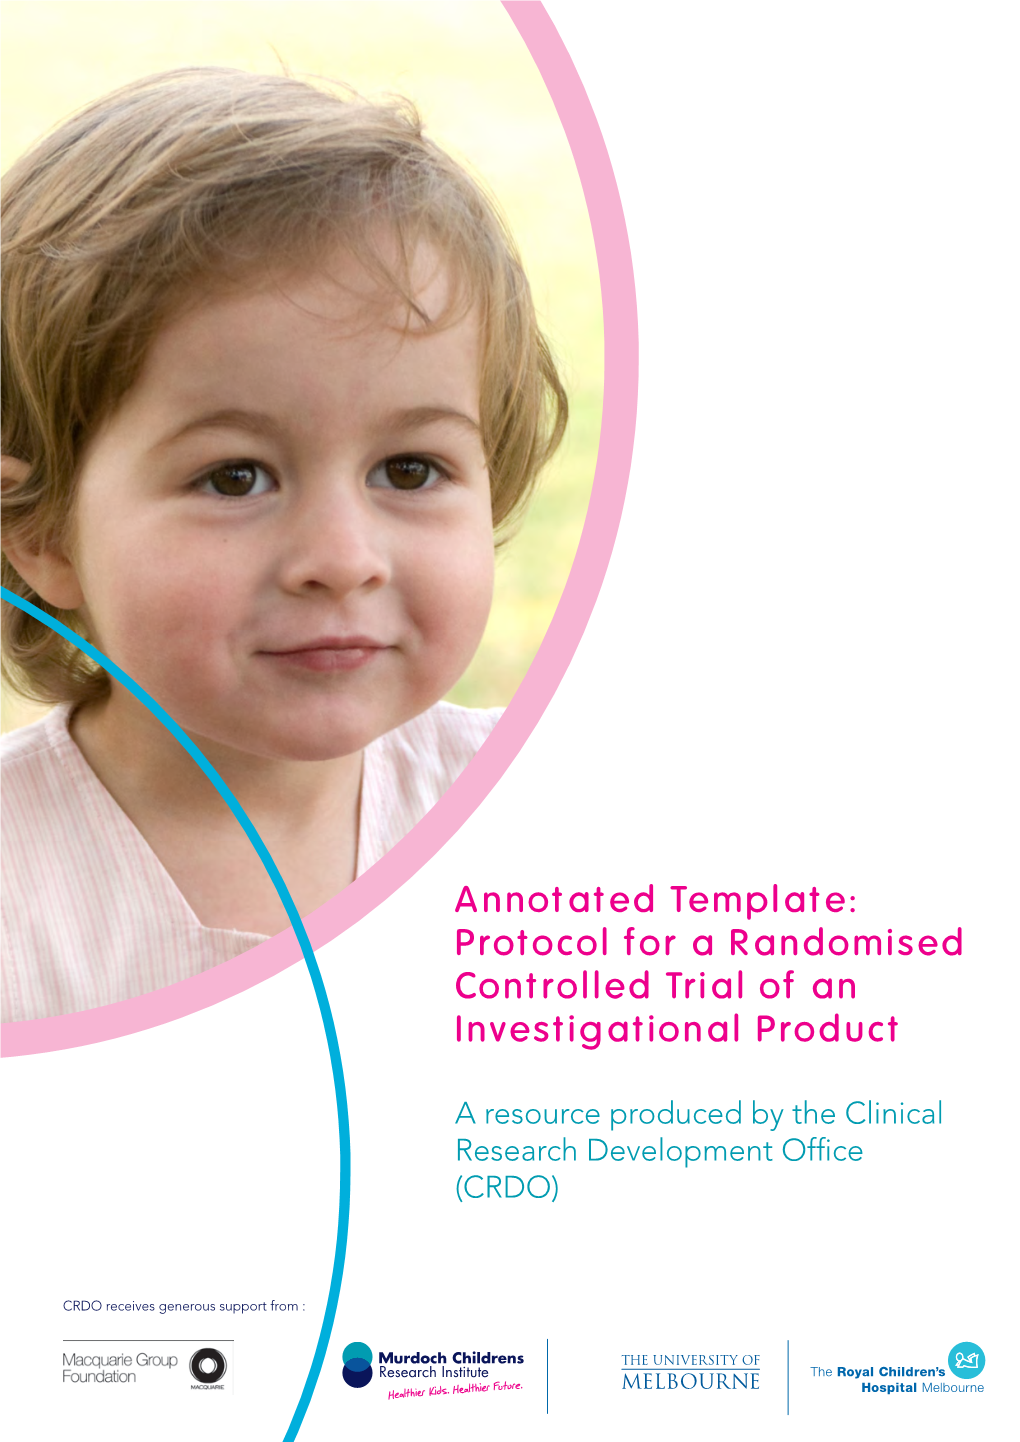 Protocol for a Randomised Controlled Trial of an Investigational Product